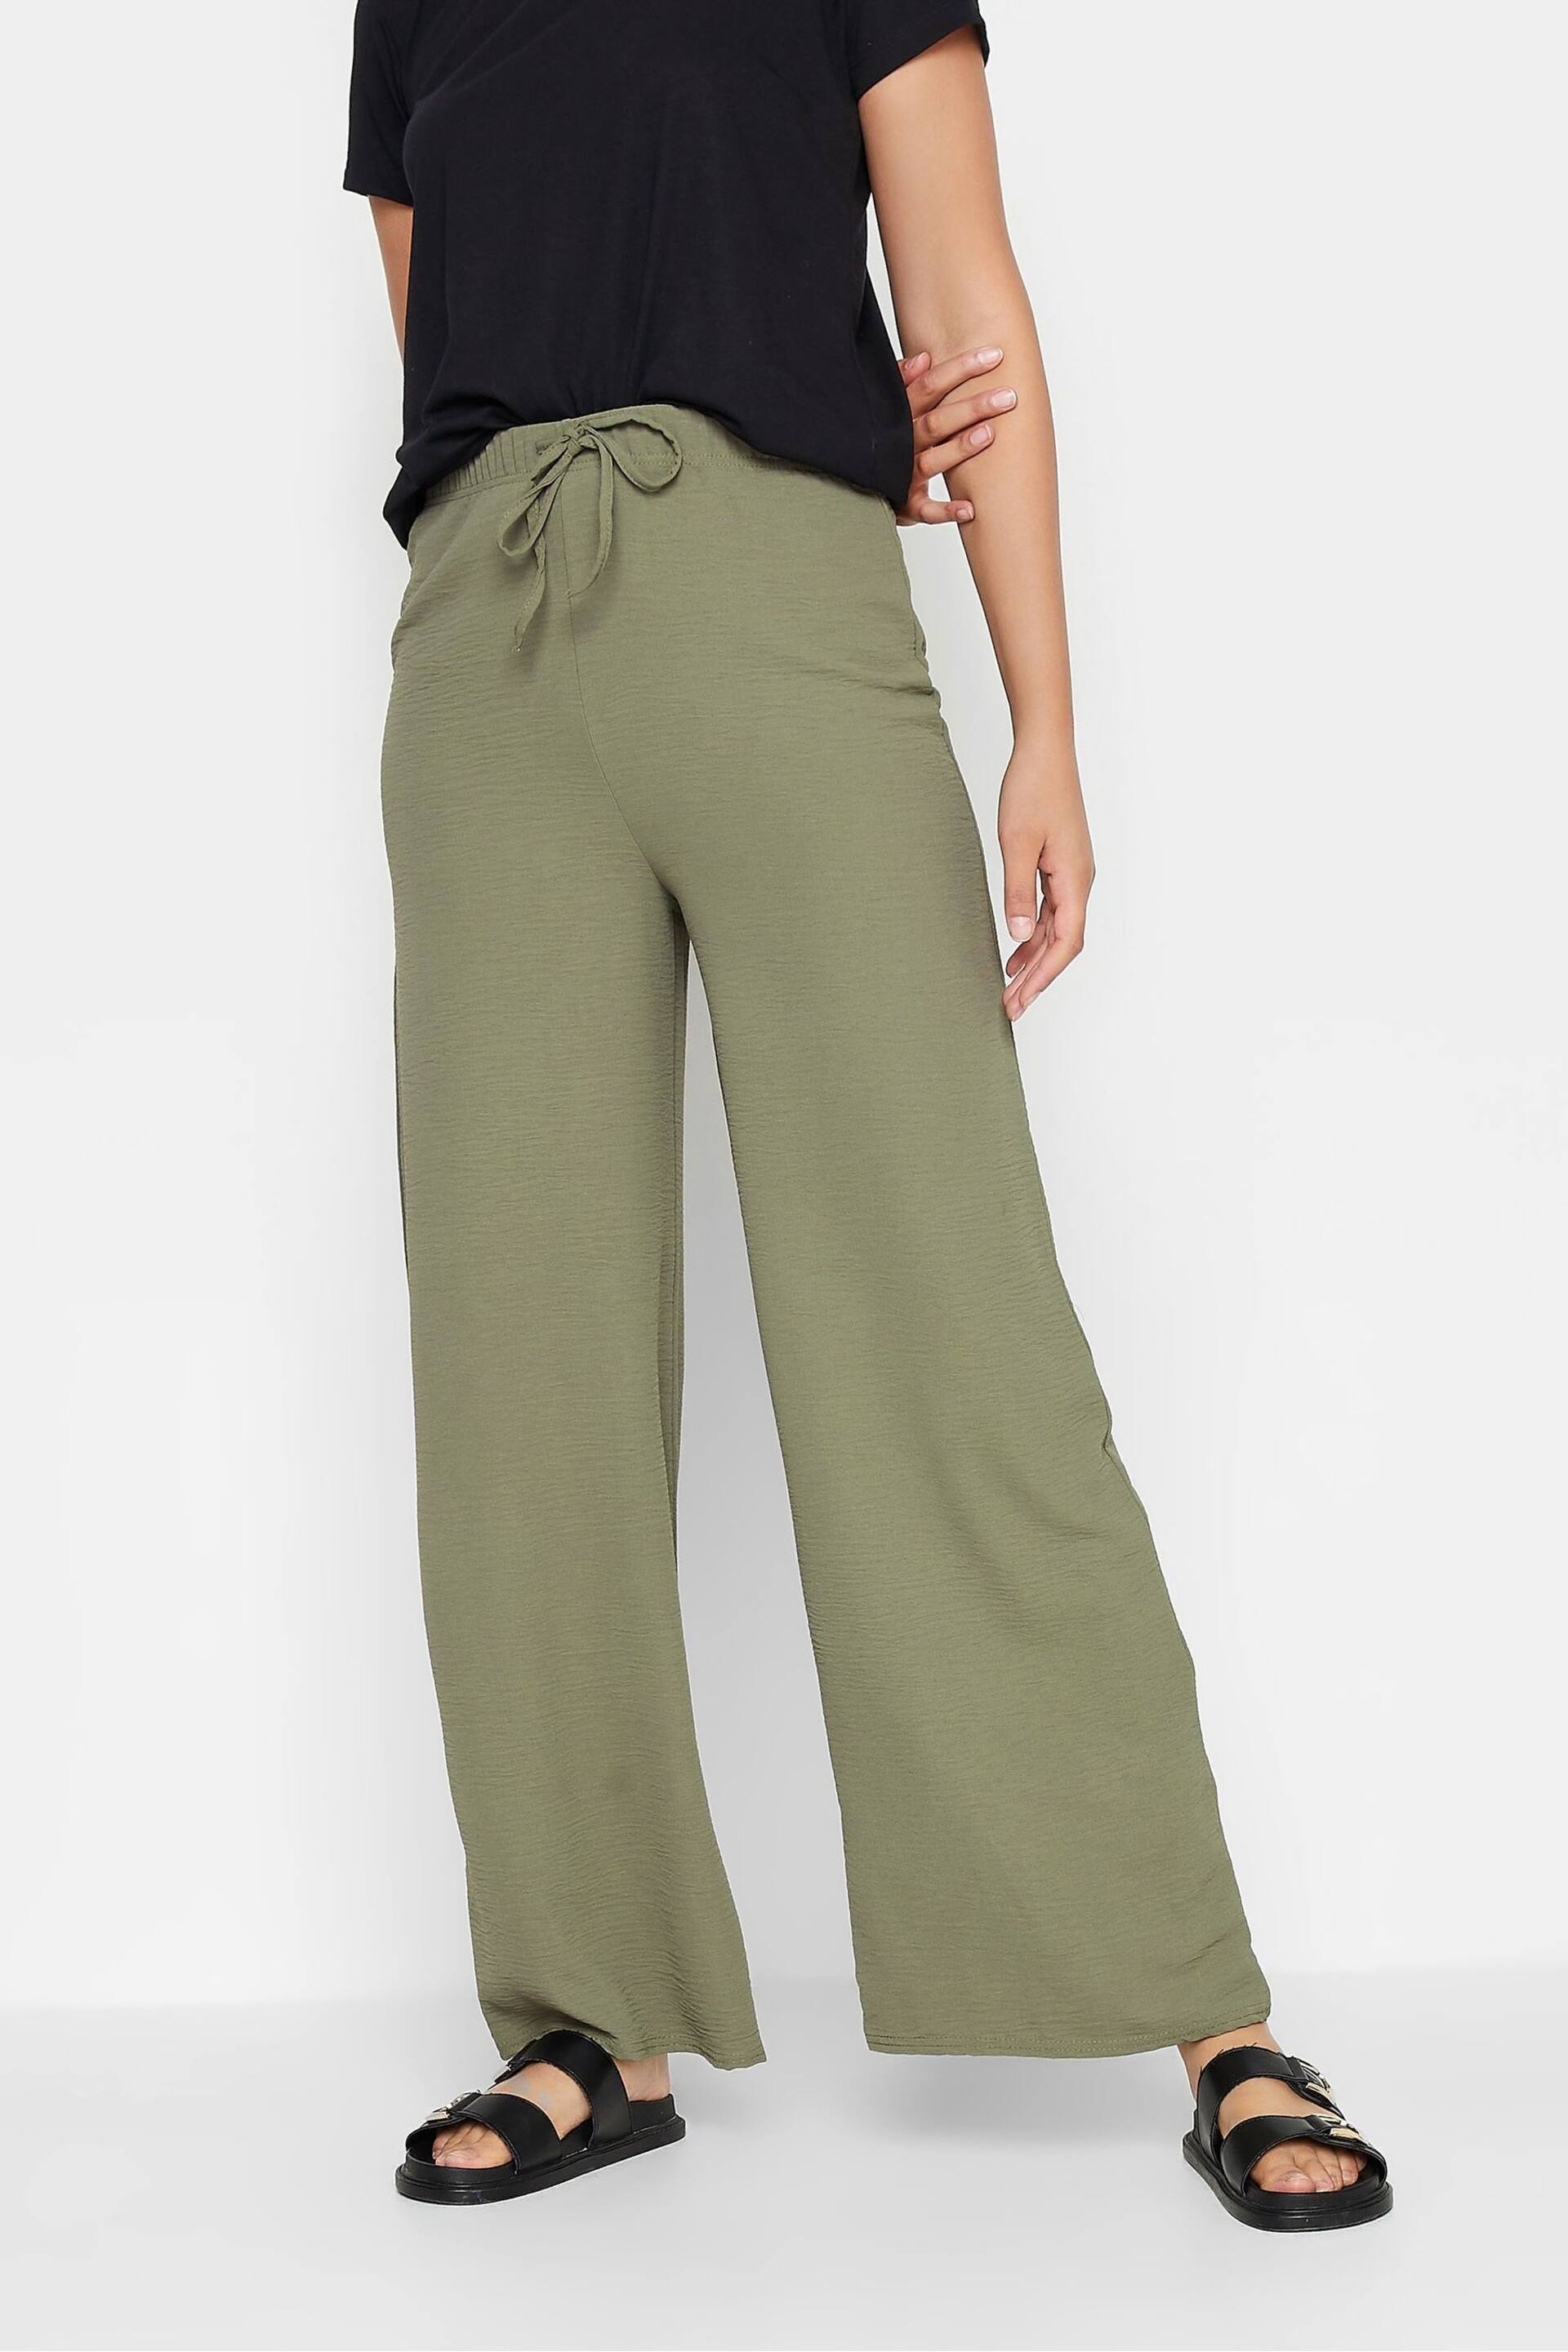 Long Tall Sally Green Wide Leg Trousers - Image 1 of 3